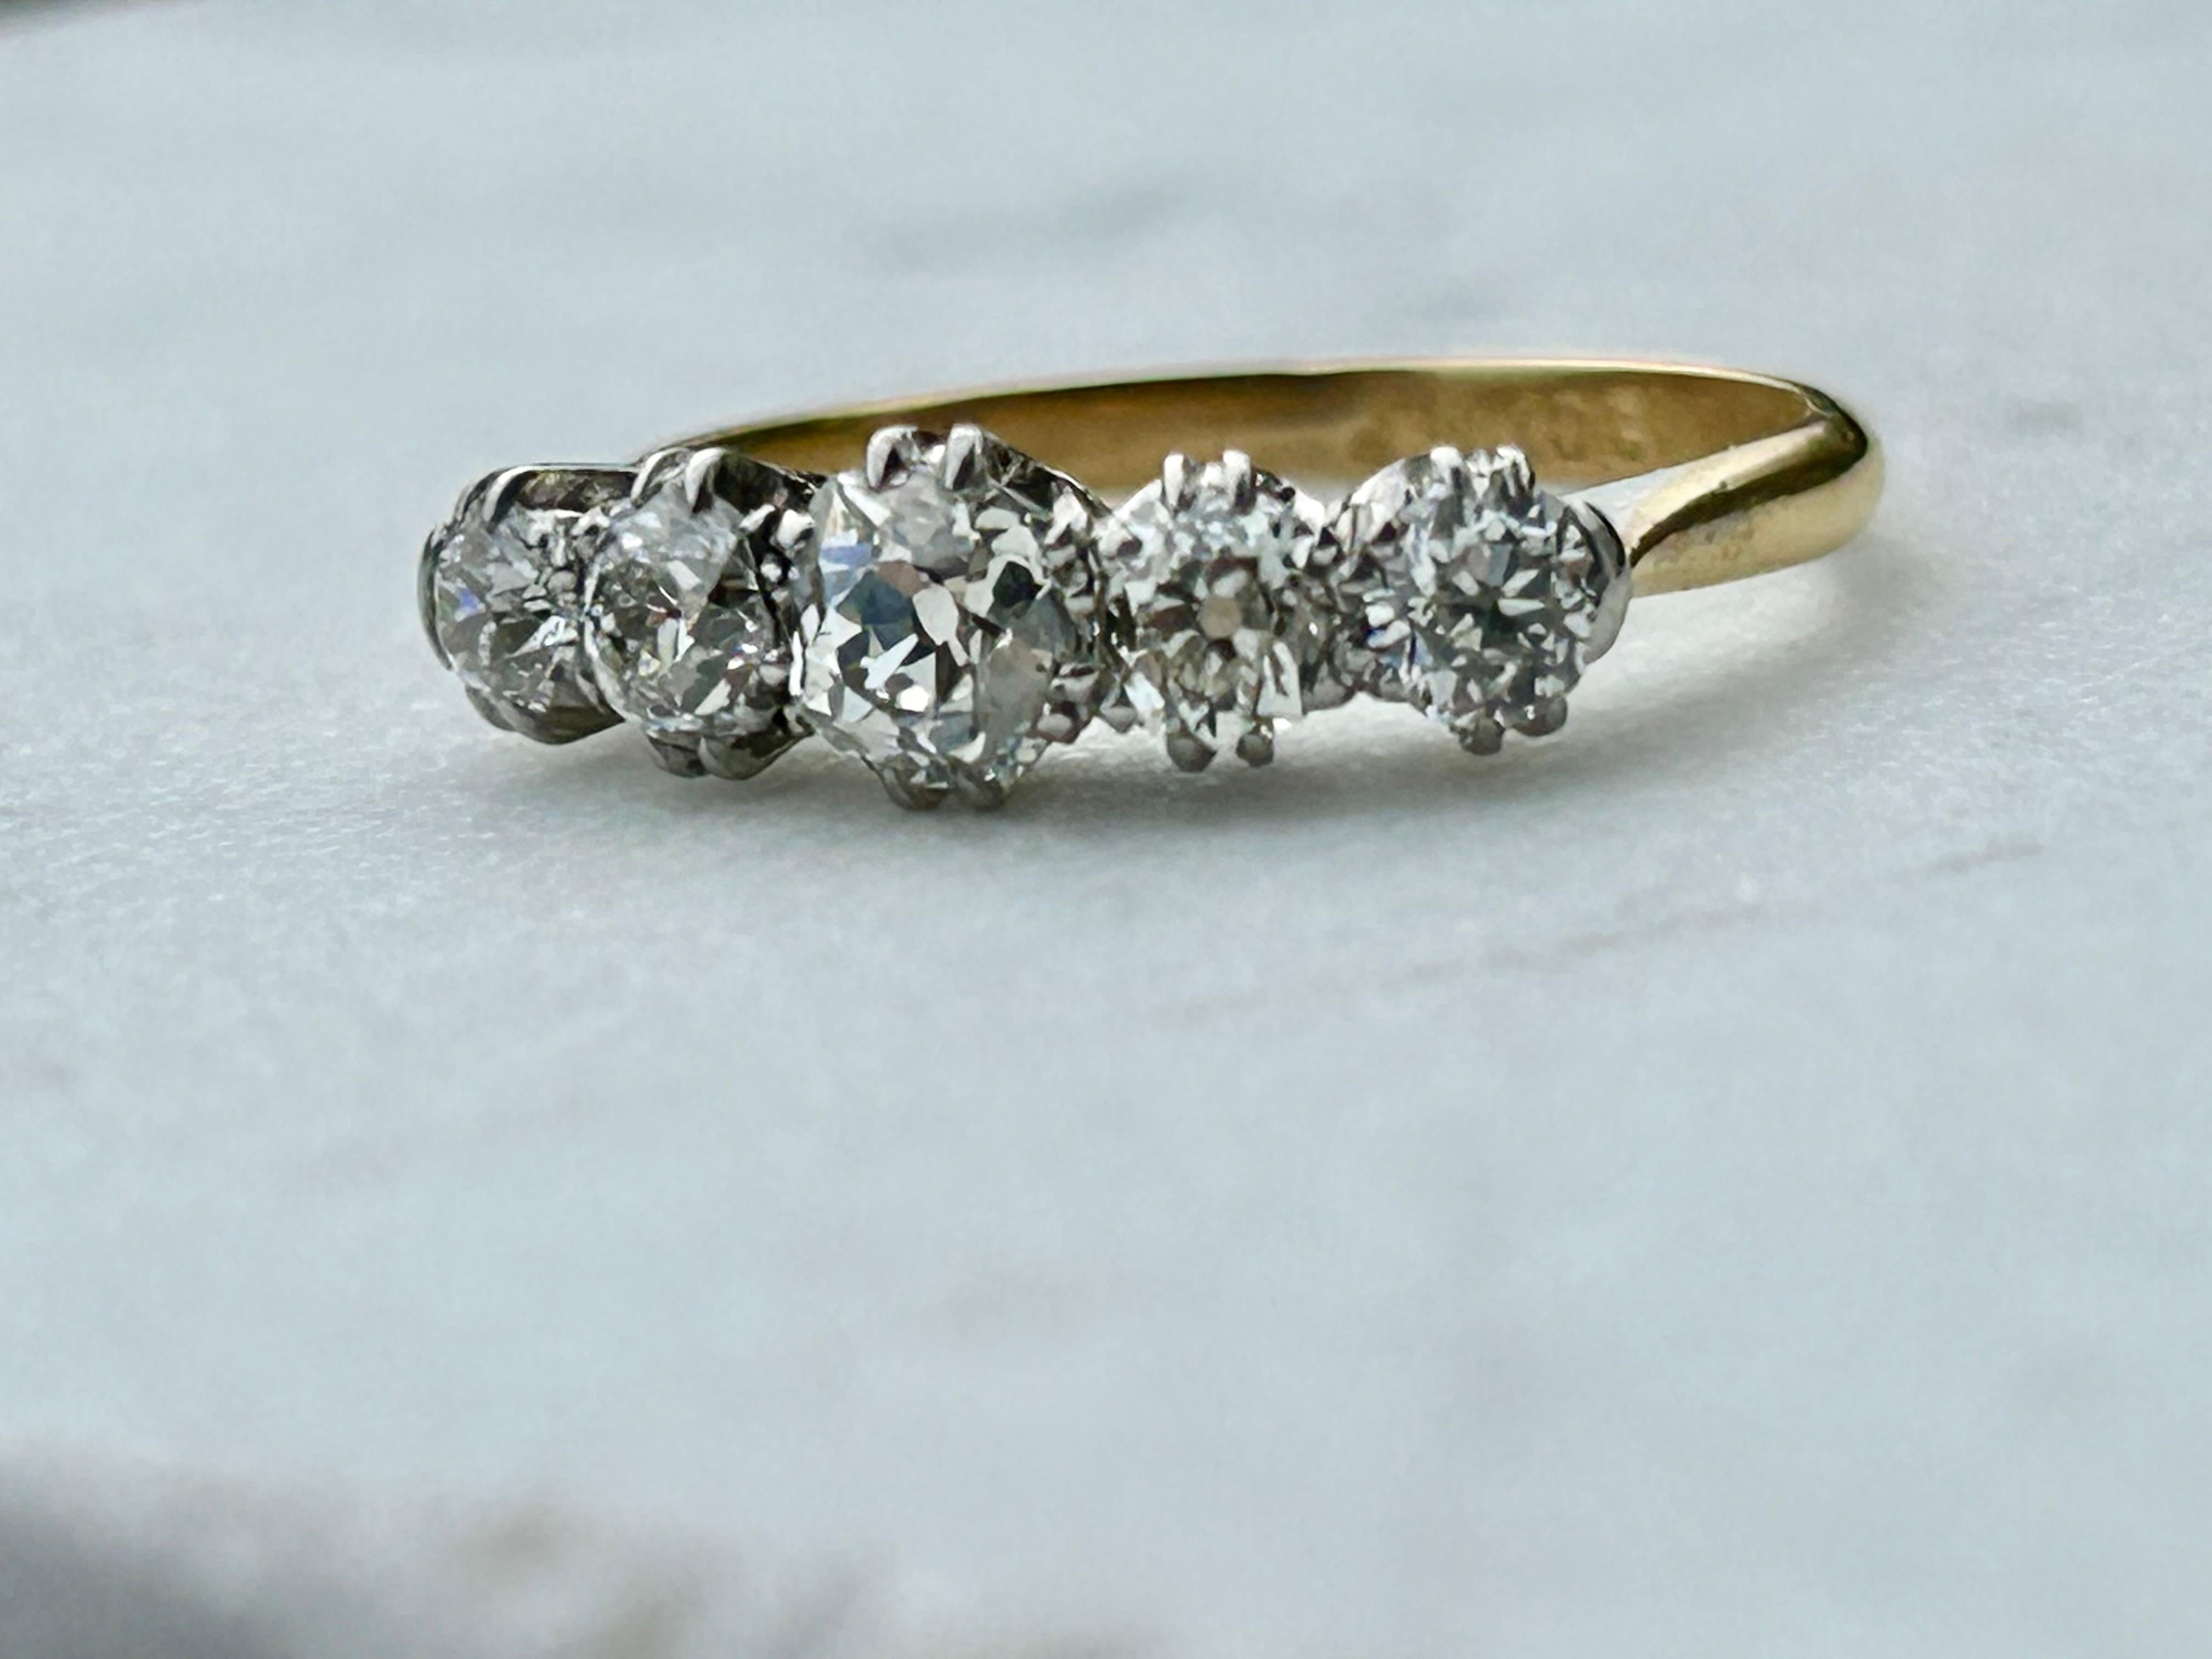 Antique Edwardian 5 stone 1.65ctw Diamond Ring 18ct Gold and PLAT. The perfect engagement ring! I love the big open culet in the central stone. These diamonds are the star of the show. They are very bright, white and sparkly.
Weight: 2.54 grams